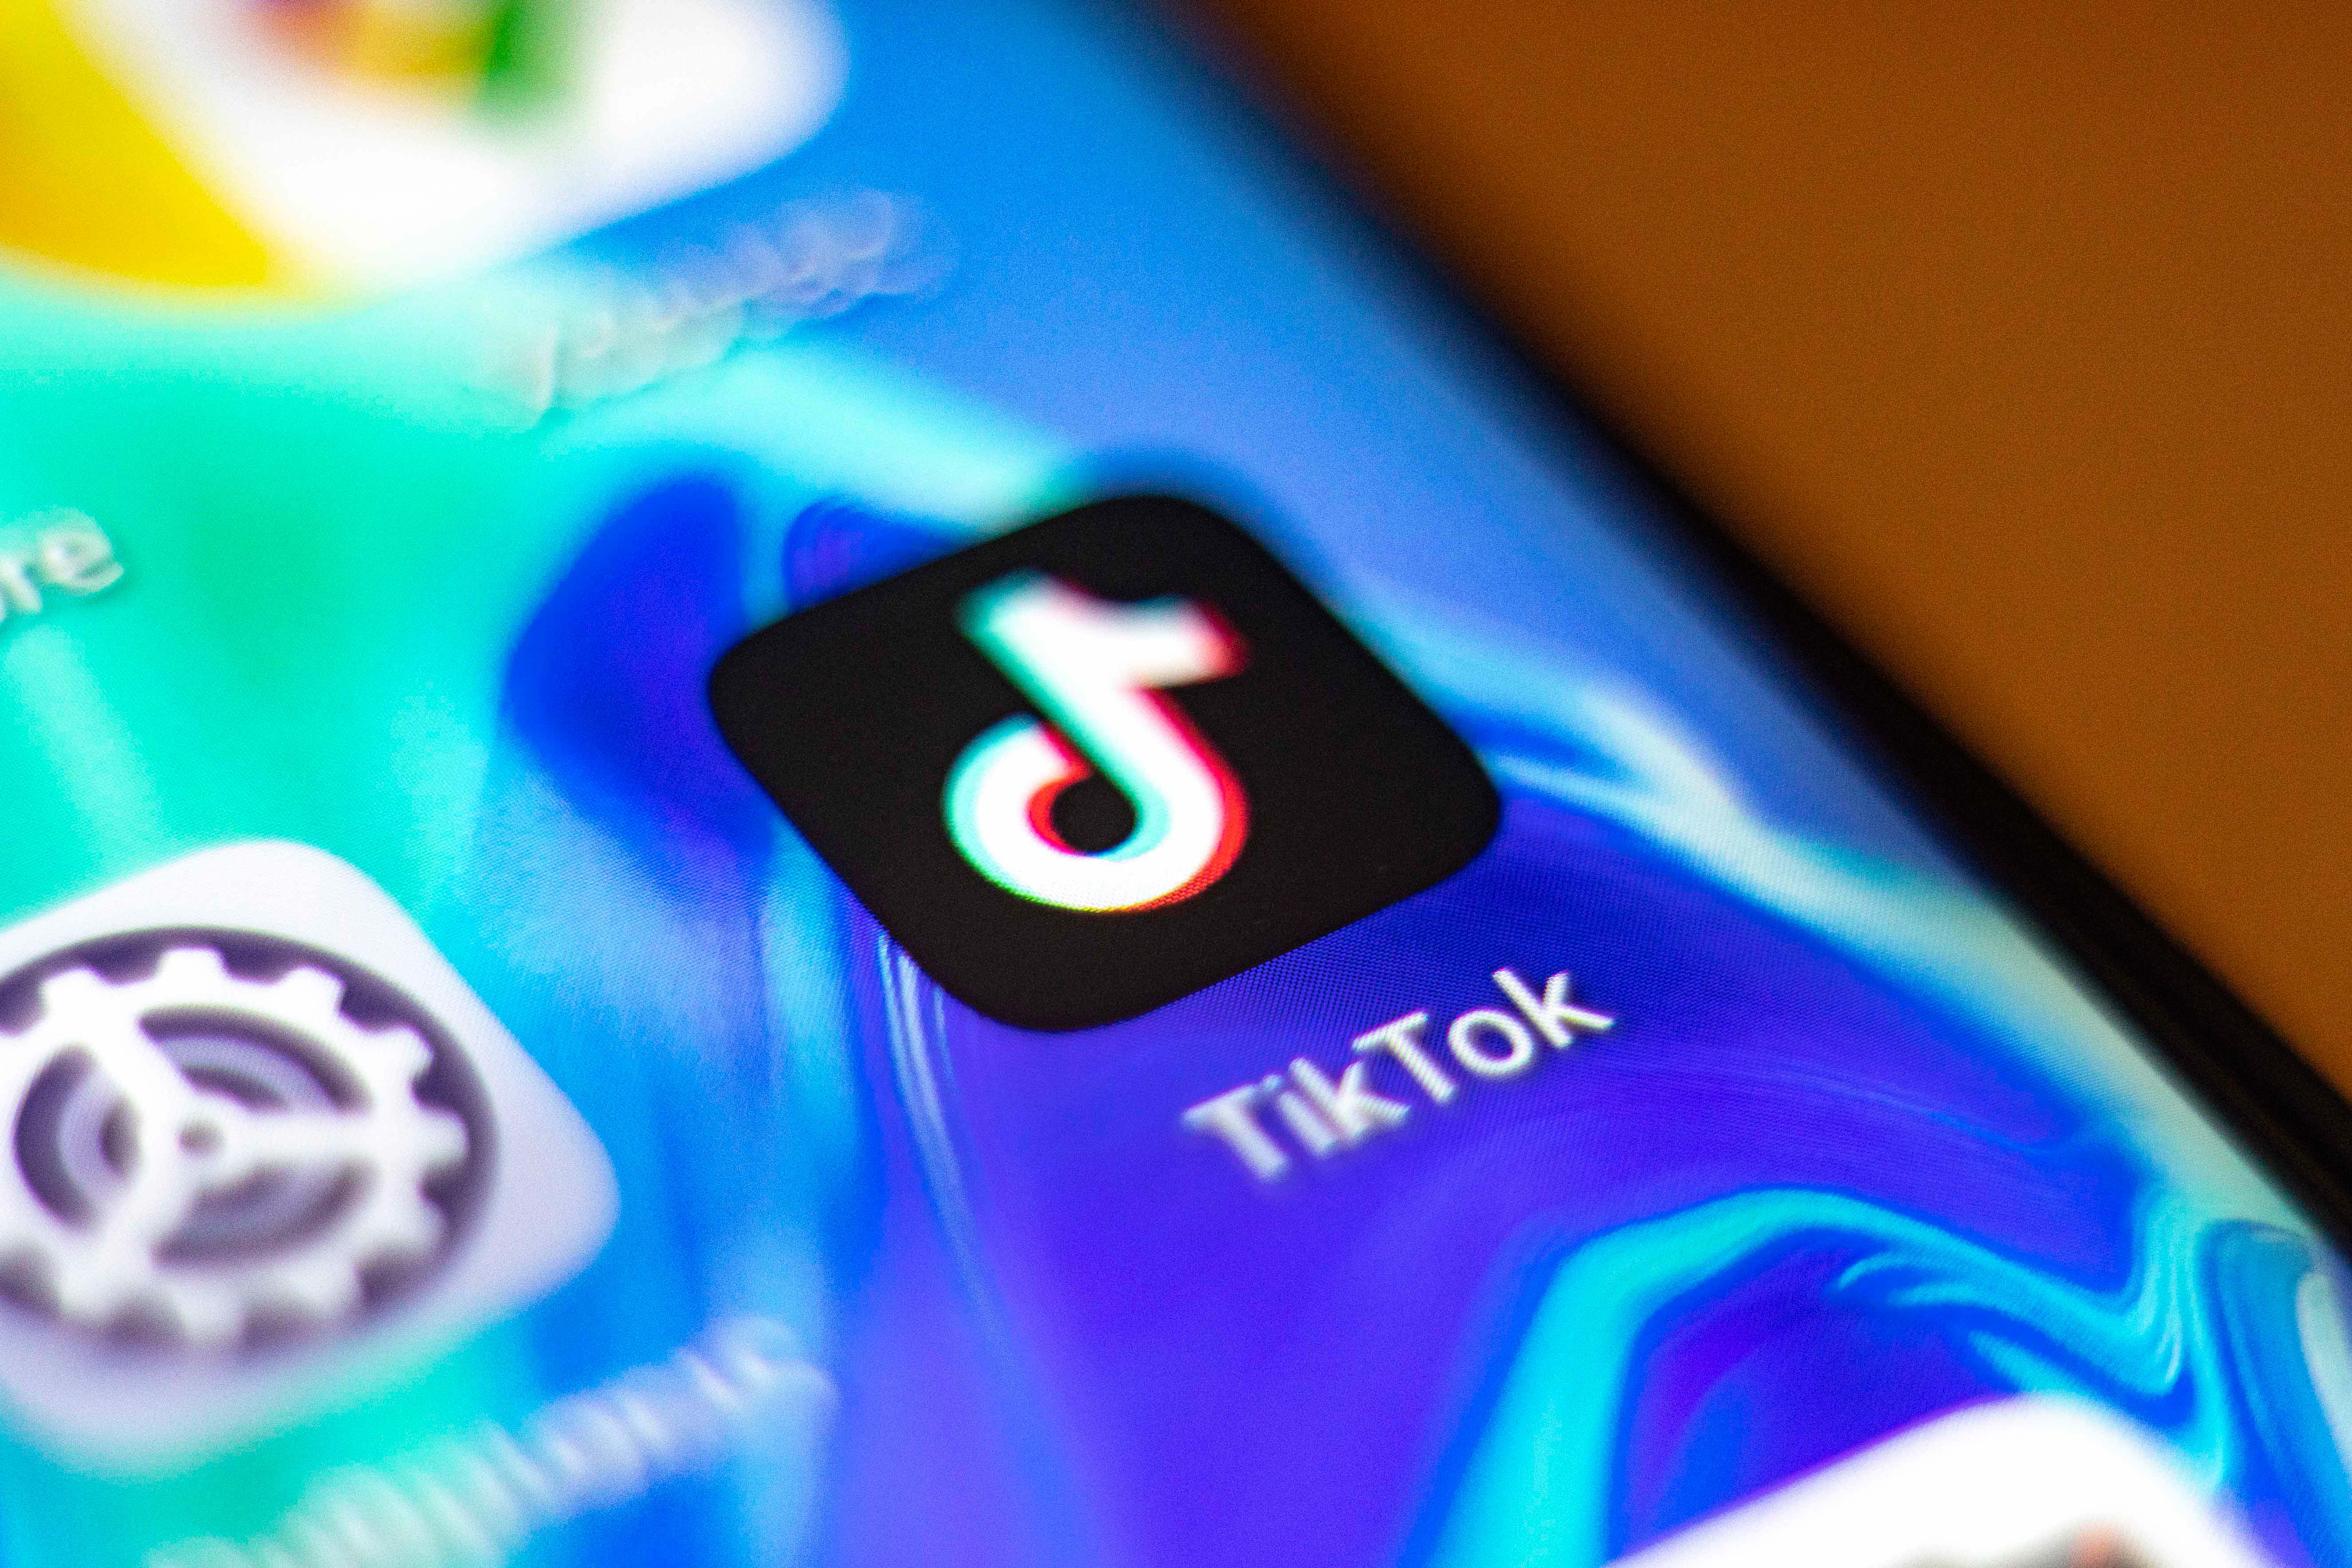 Microsoft found a severe one-click exploit in TikTok’s Android app